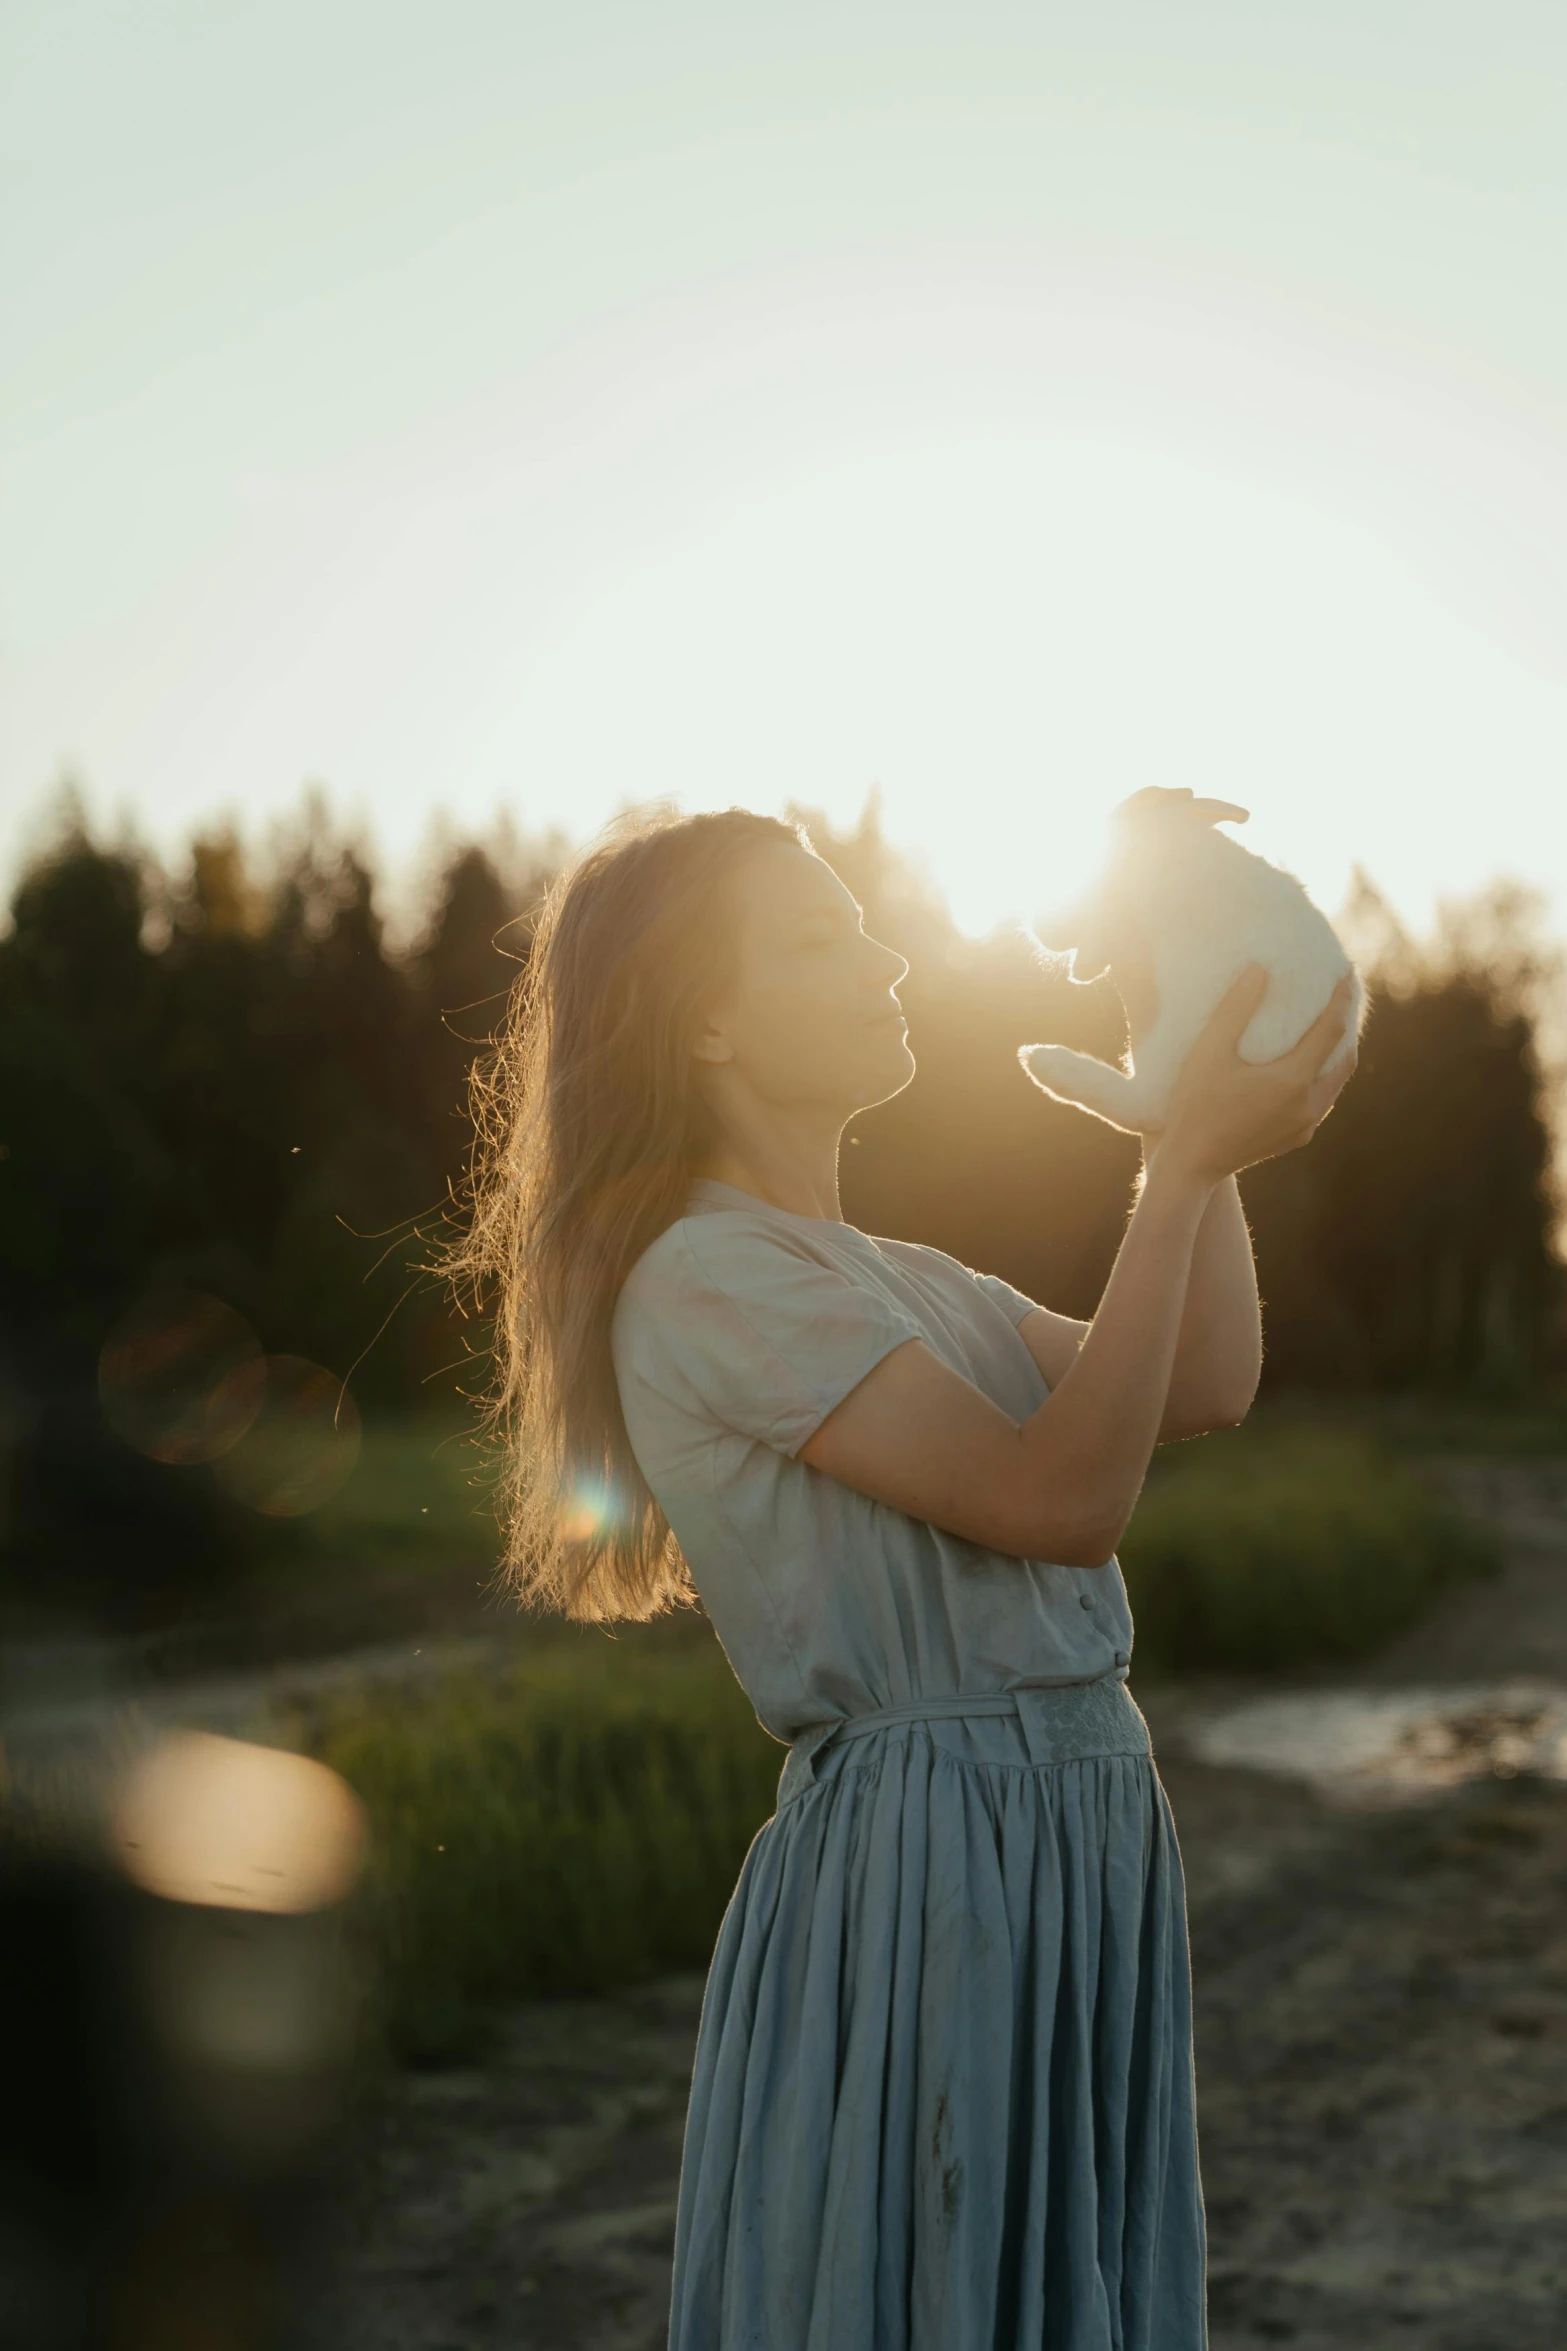 a woman in a blue dress drinking out of a cup, pexels contest winner, romanticism, sunset halo behind her head, holding a rabbit, play of light, maternal